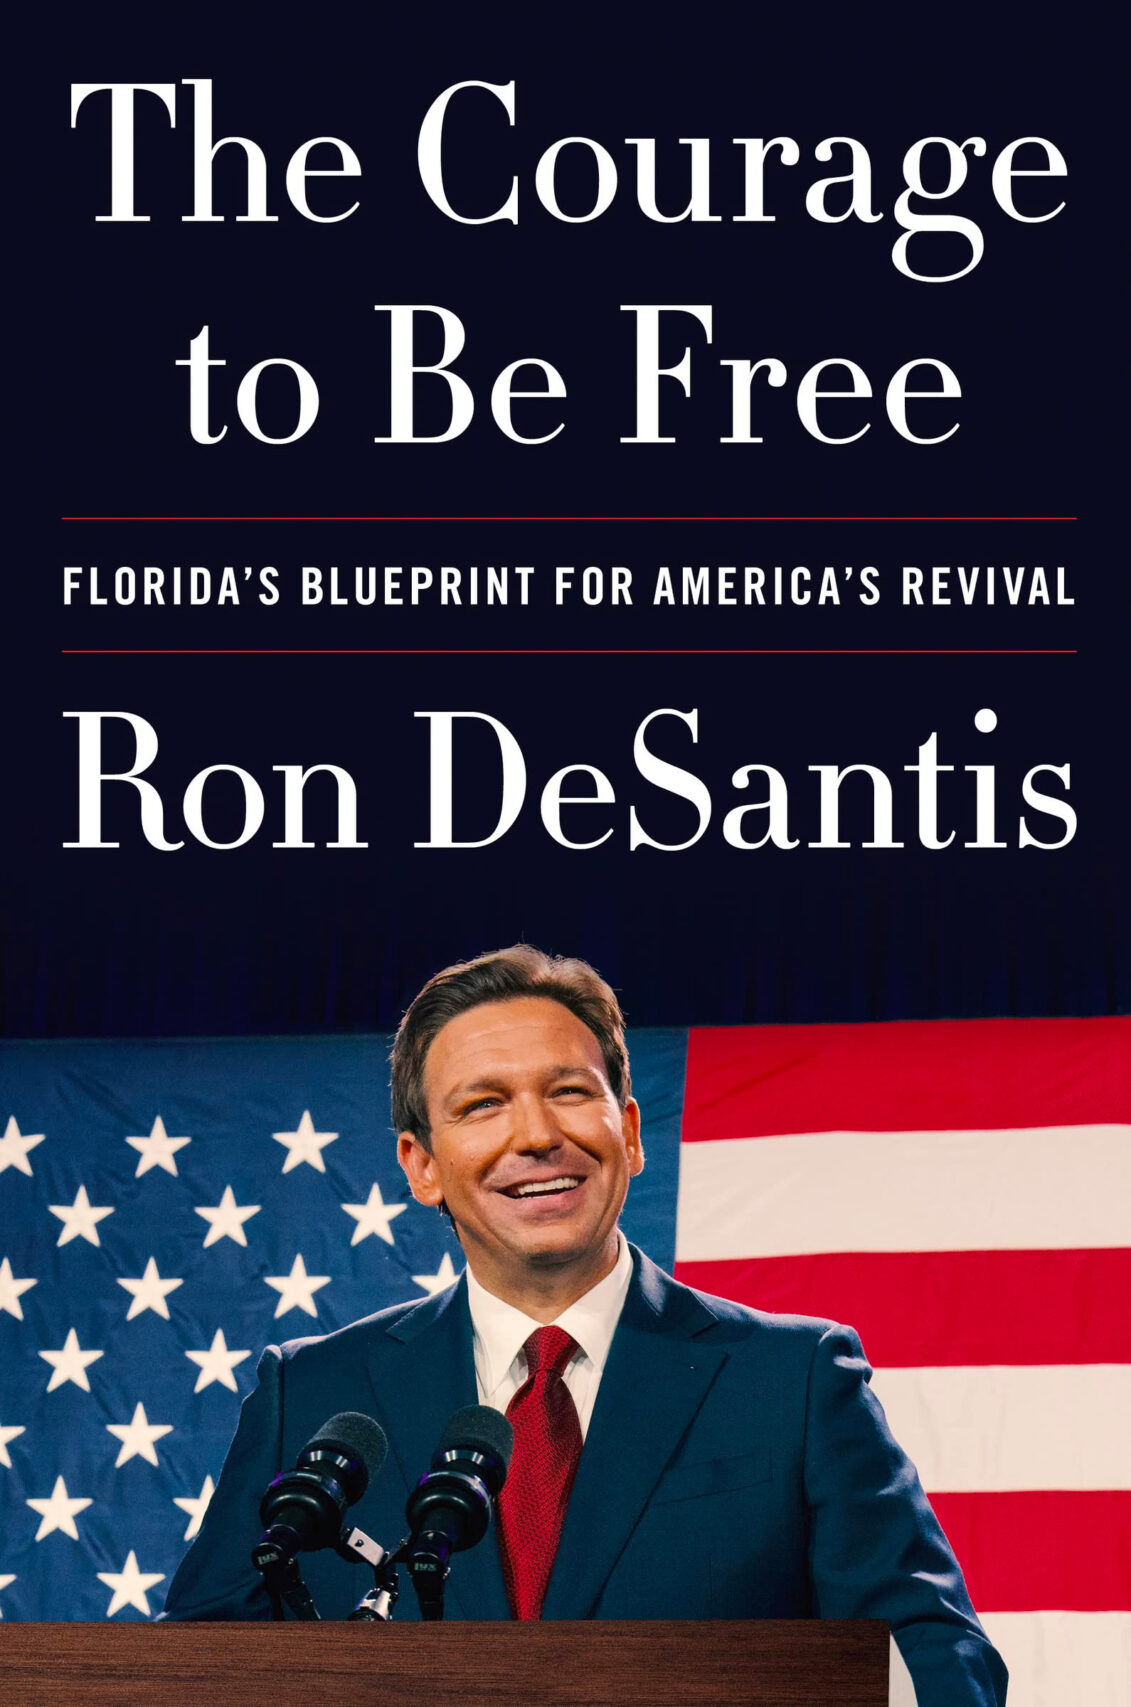 The Courage to Be Free by Ron DeSantis